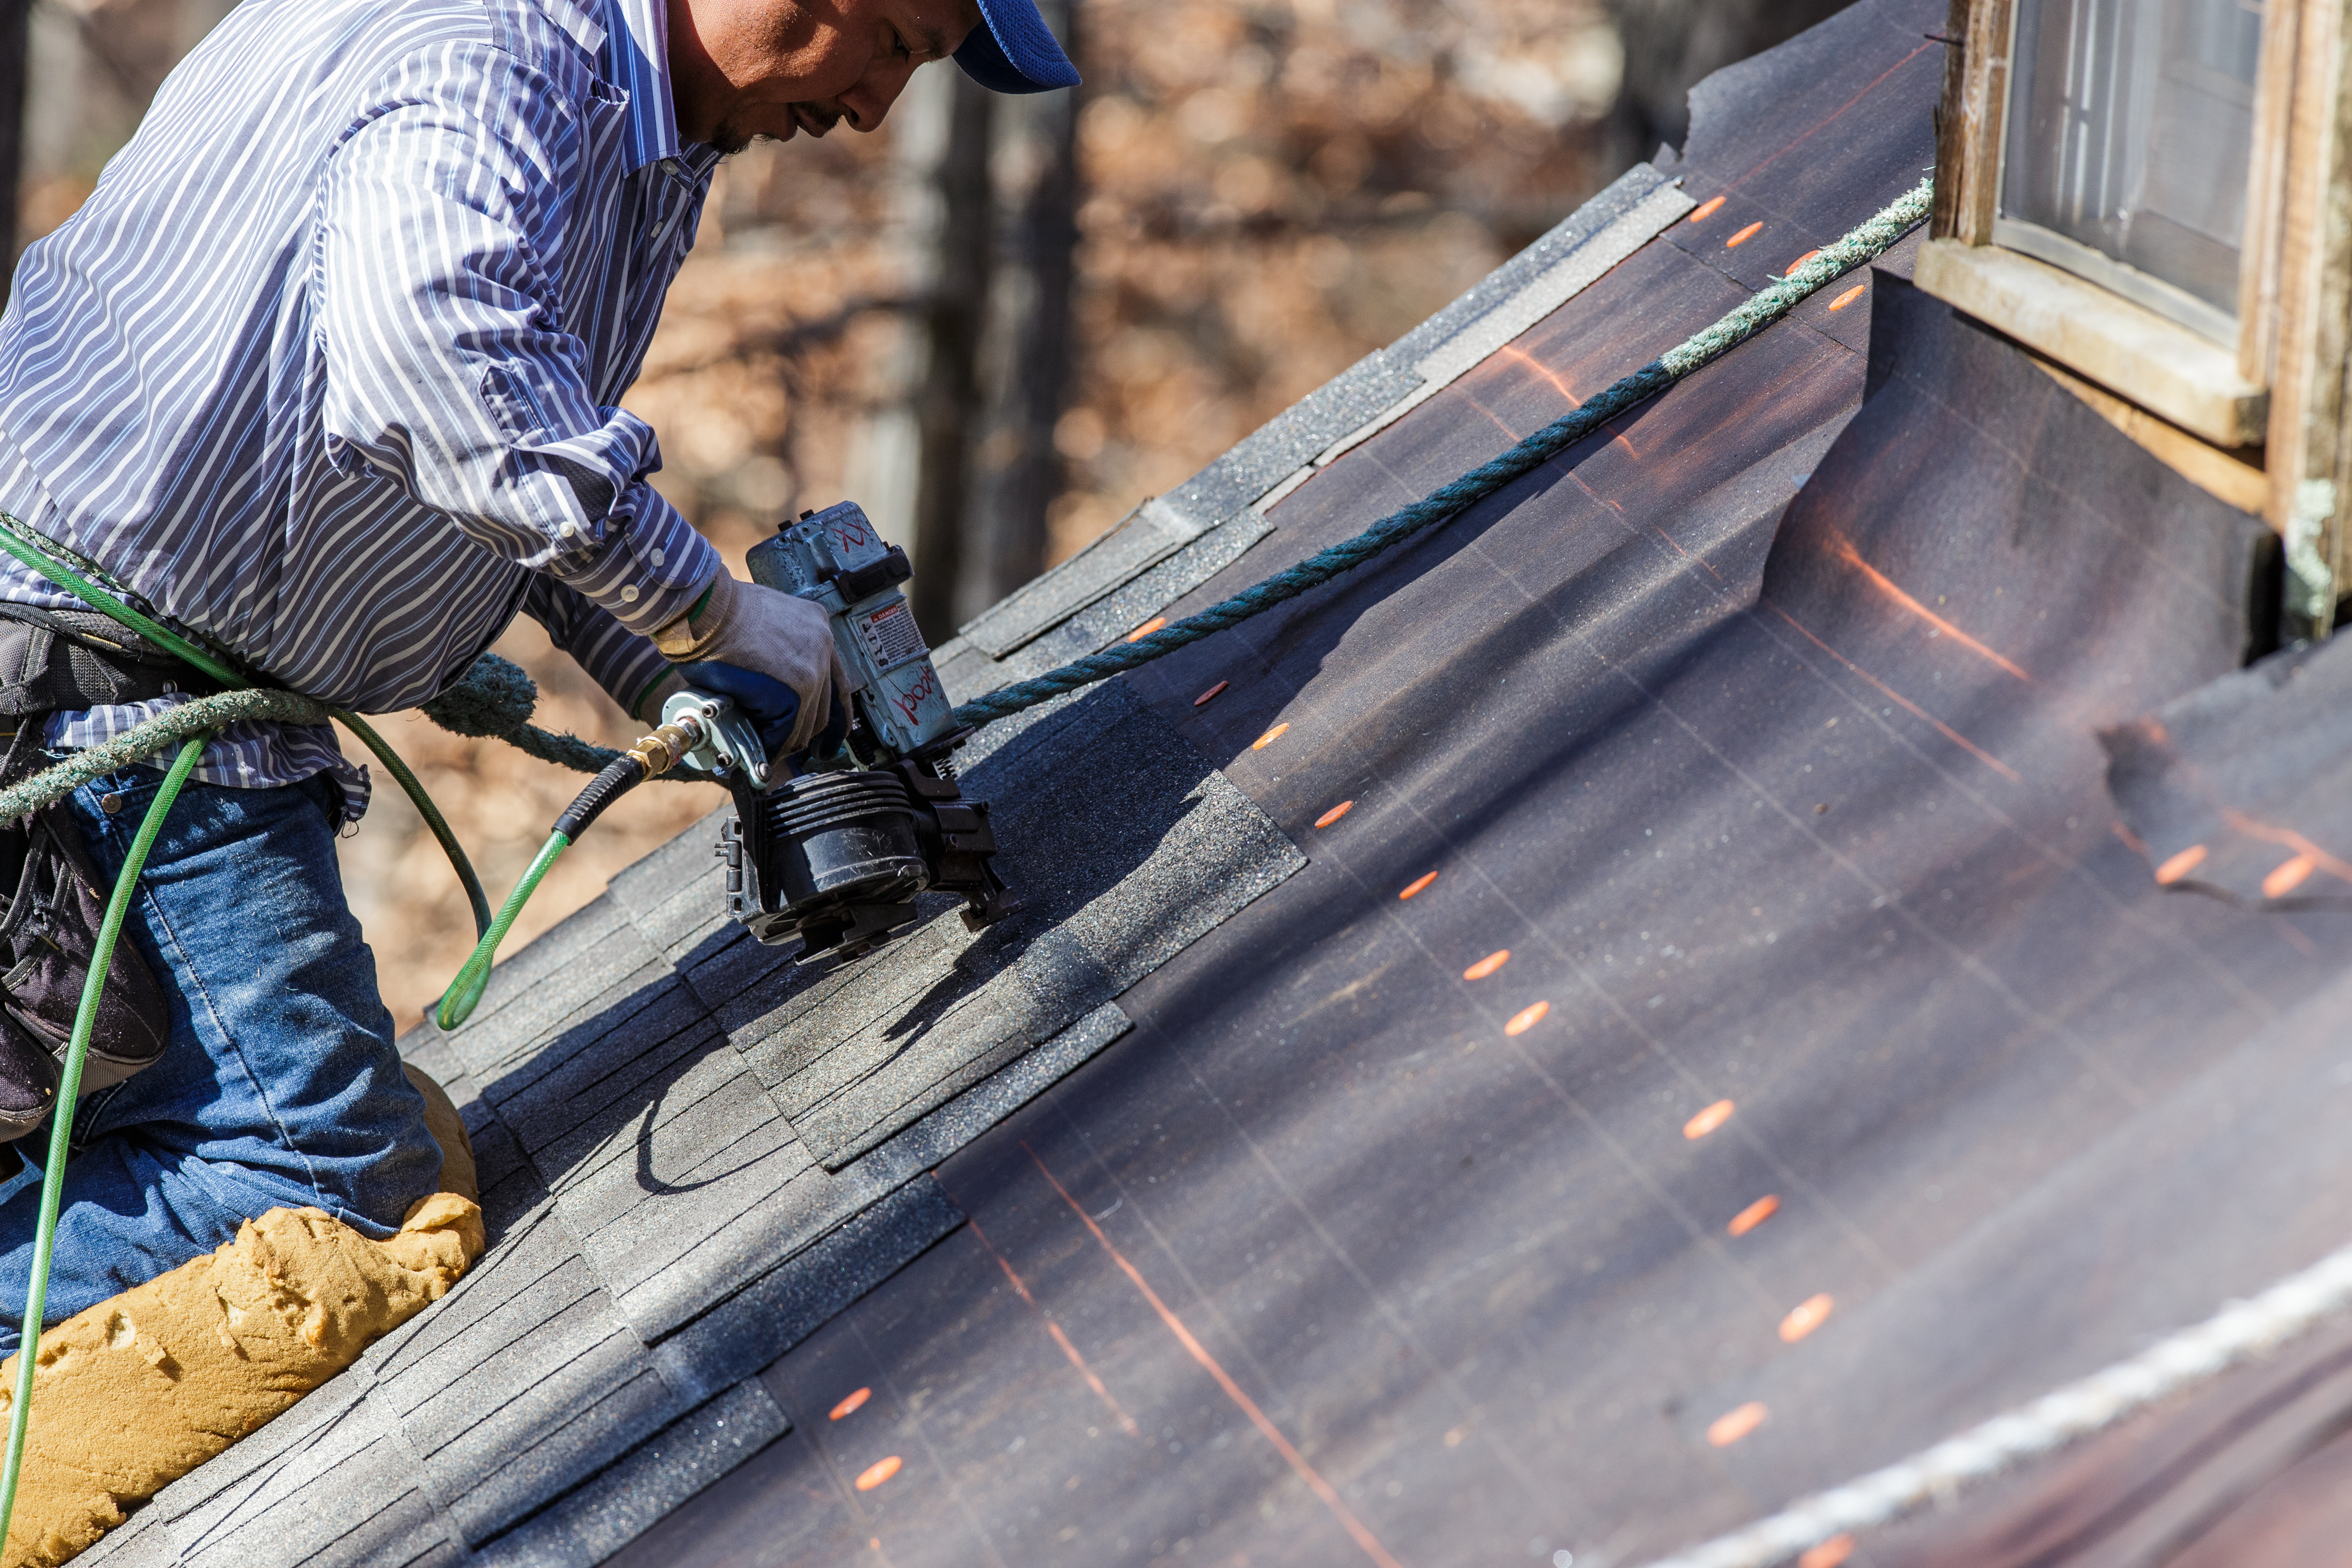 Charleston Roofing Contractors Titan Roofing LLC Offers Roof Repair and Replacement 843-647-3183